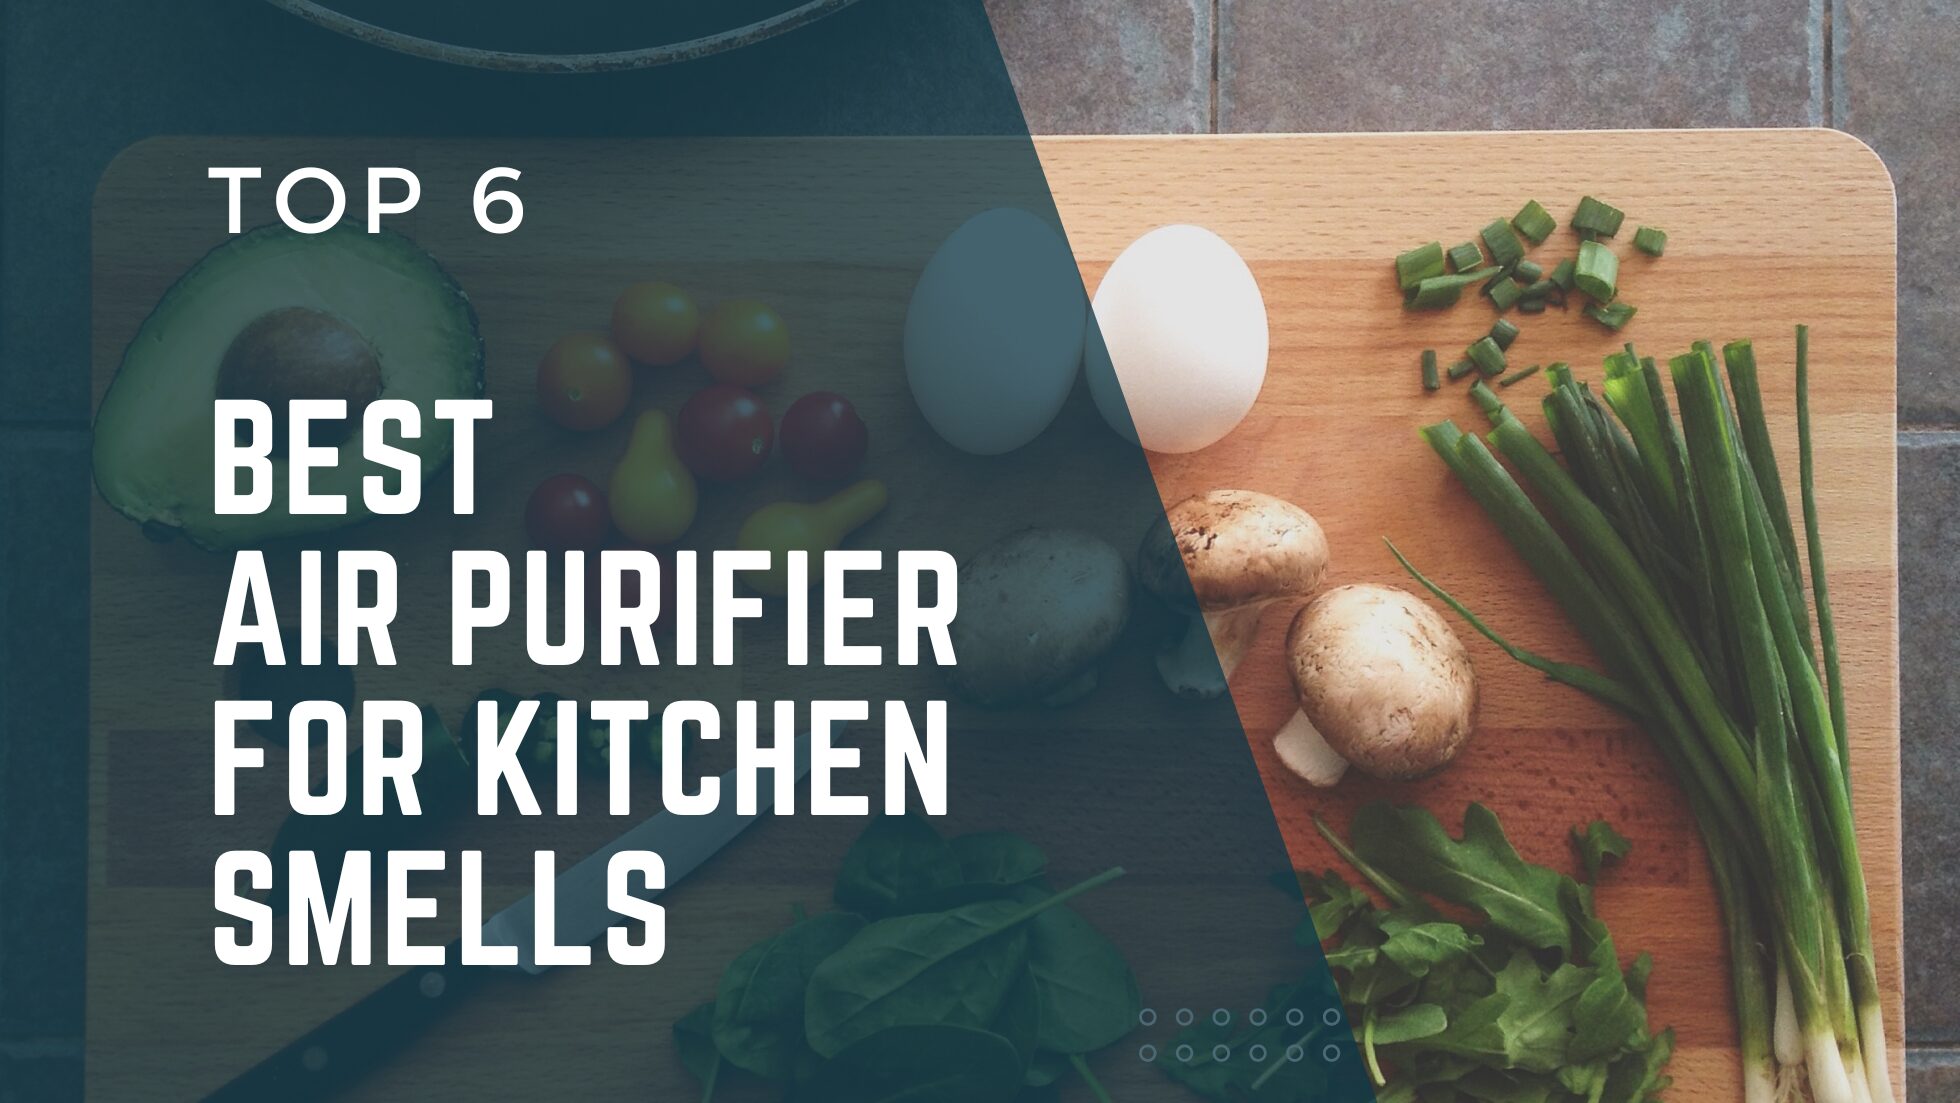 You are currently viewing Top 6 Best Air Purifier for Kitchen Smells